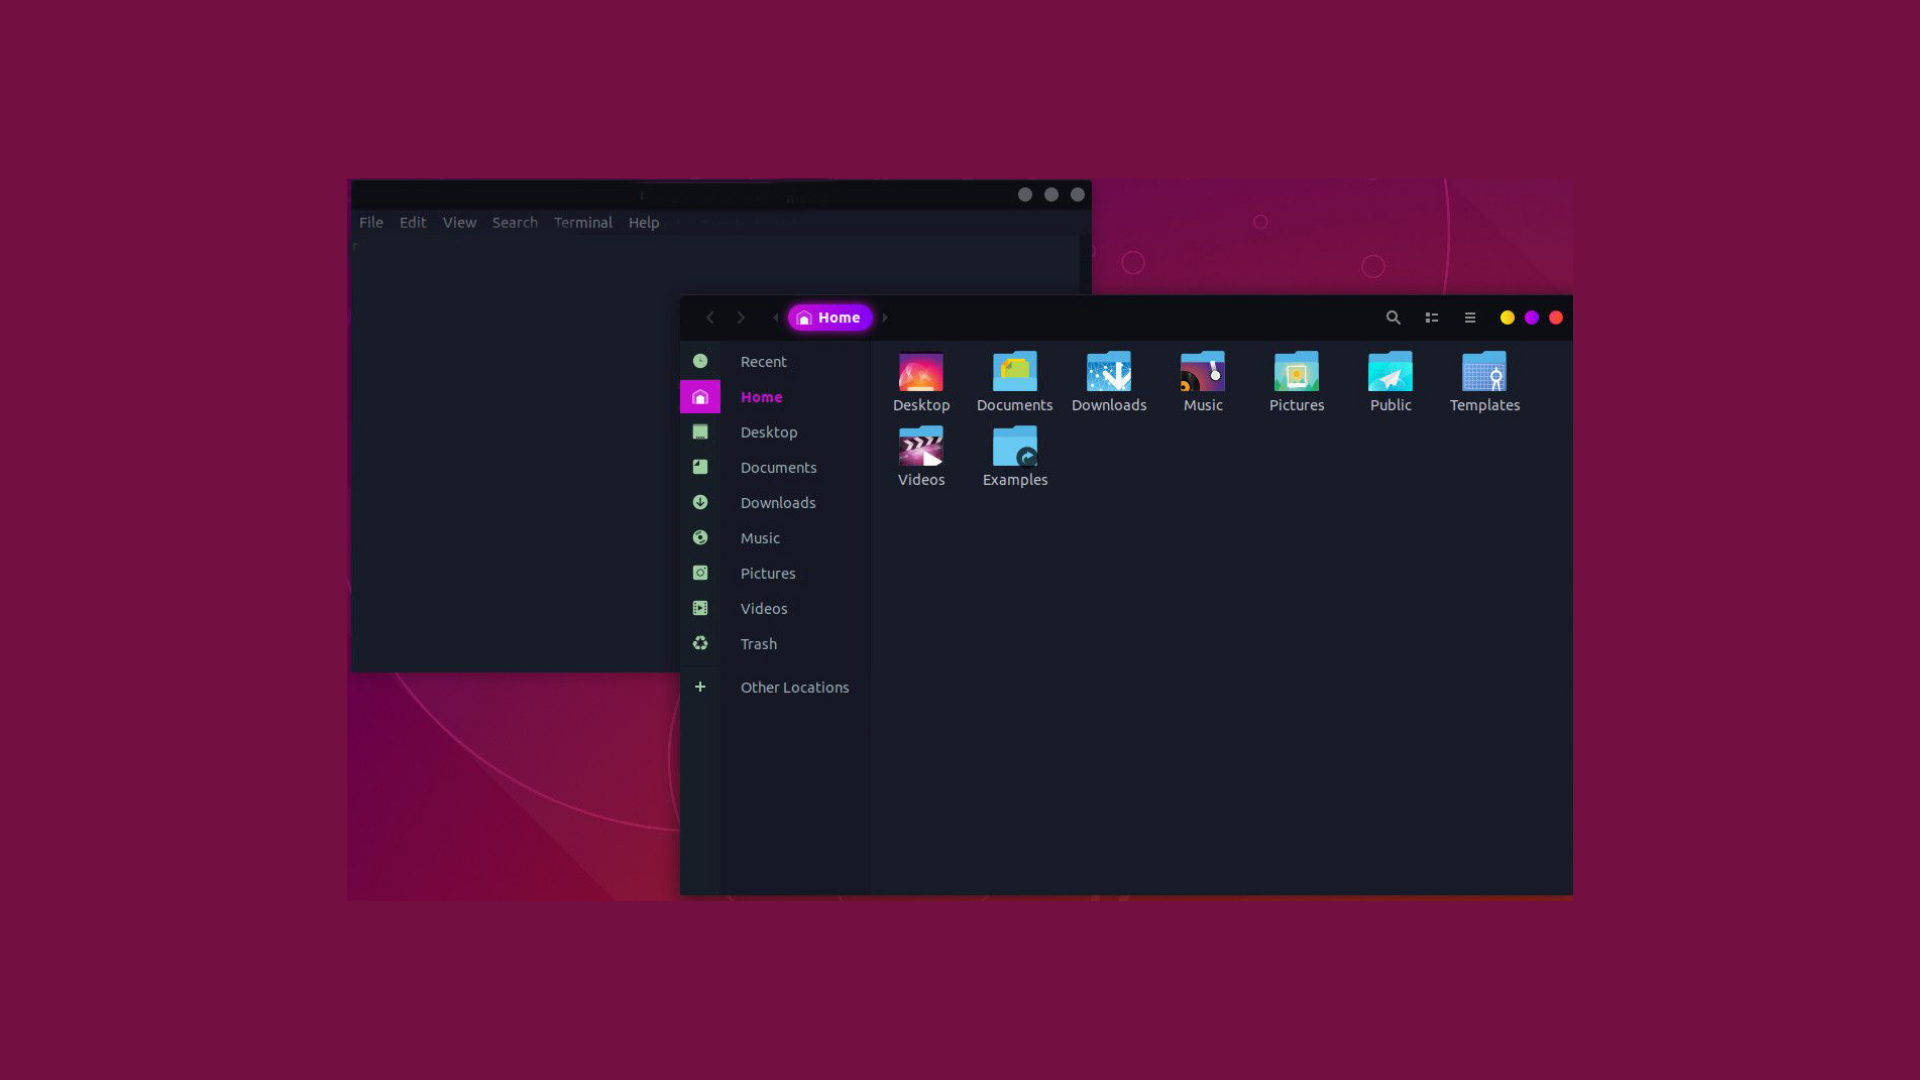 Some The Best Themes For Ubuntu & OS Noobs